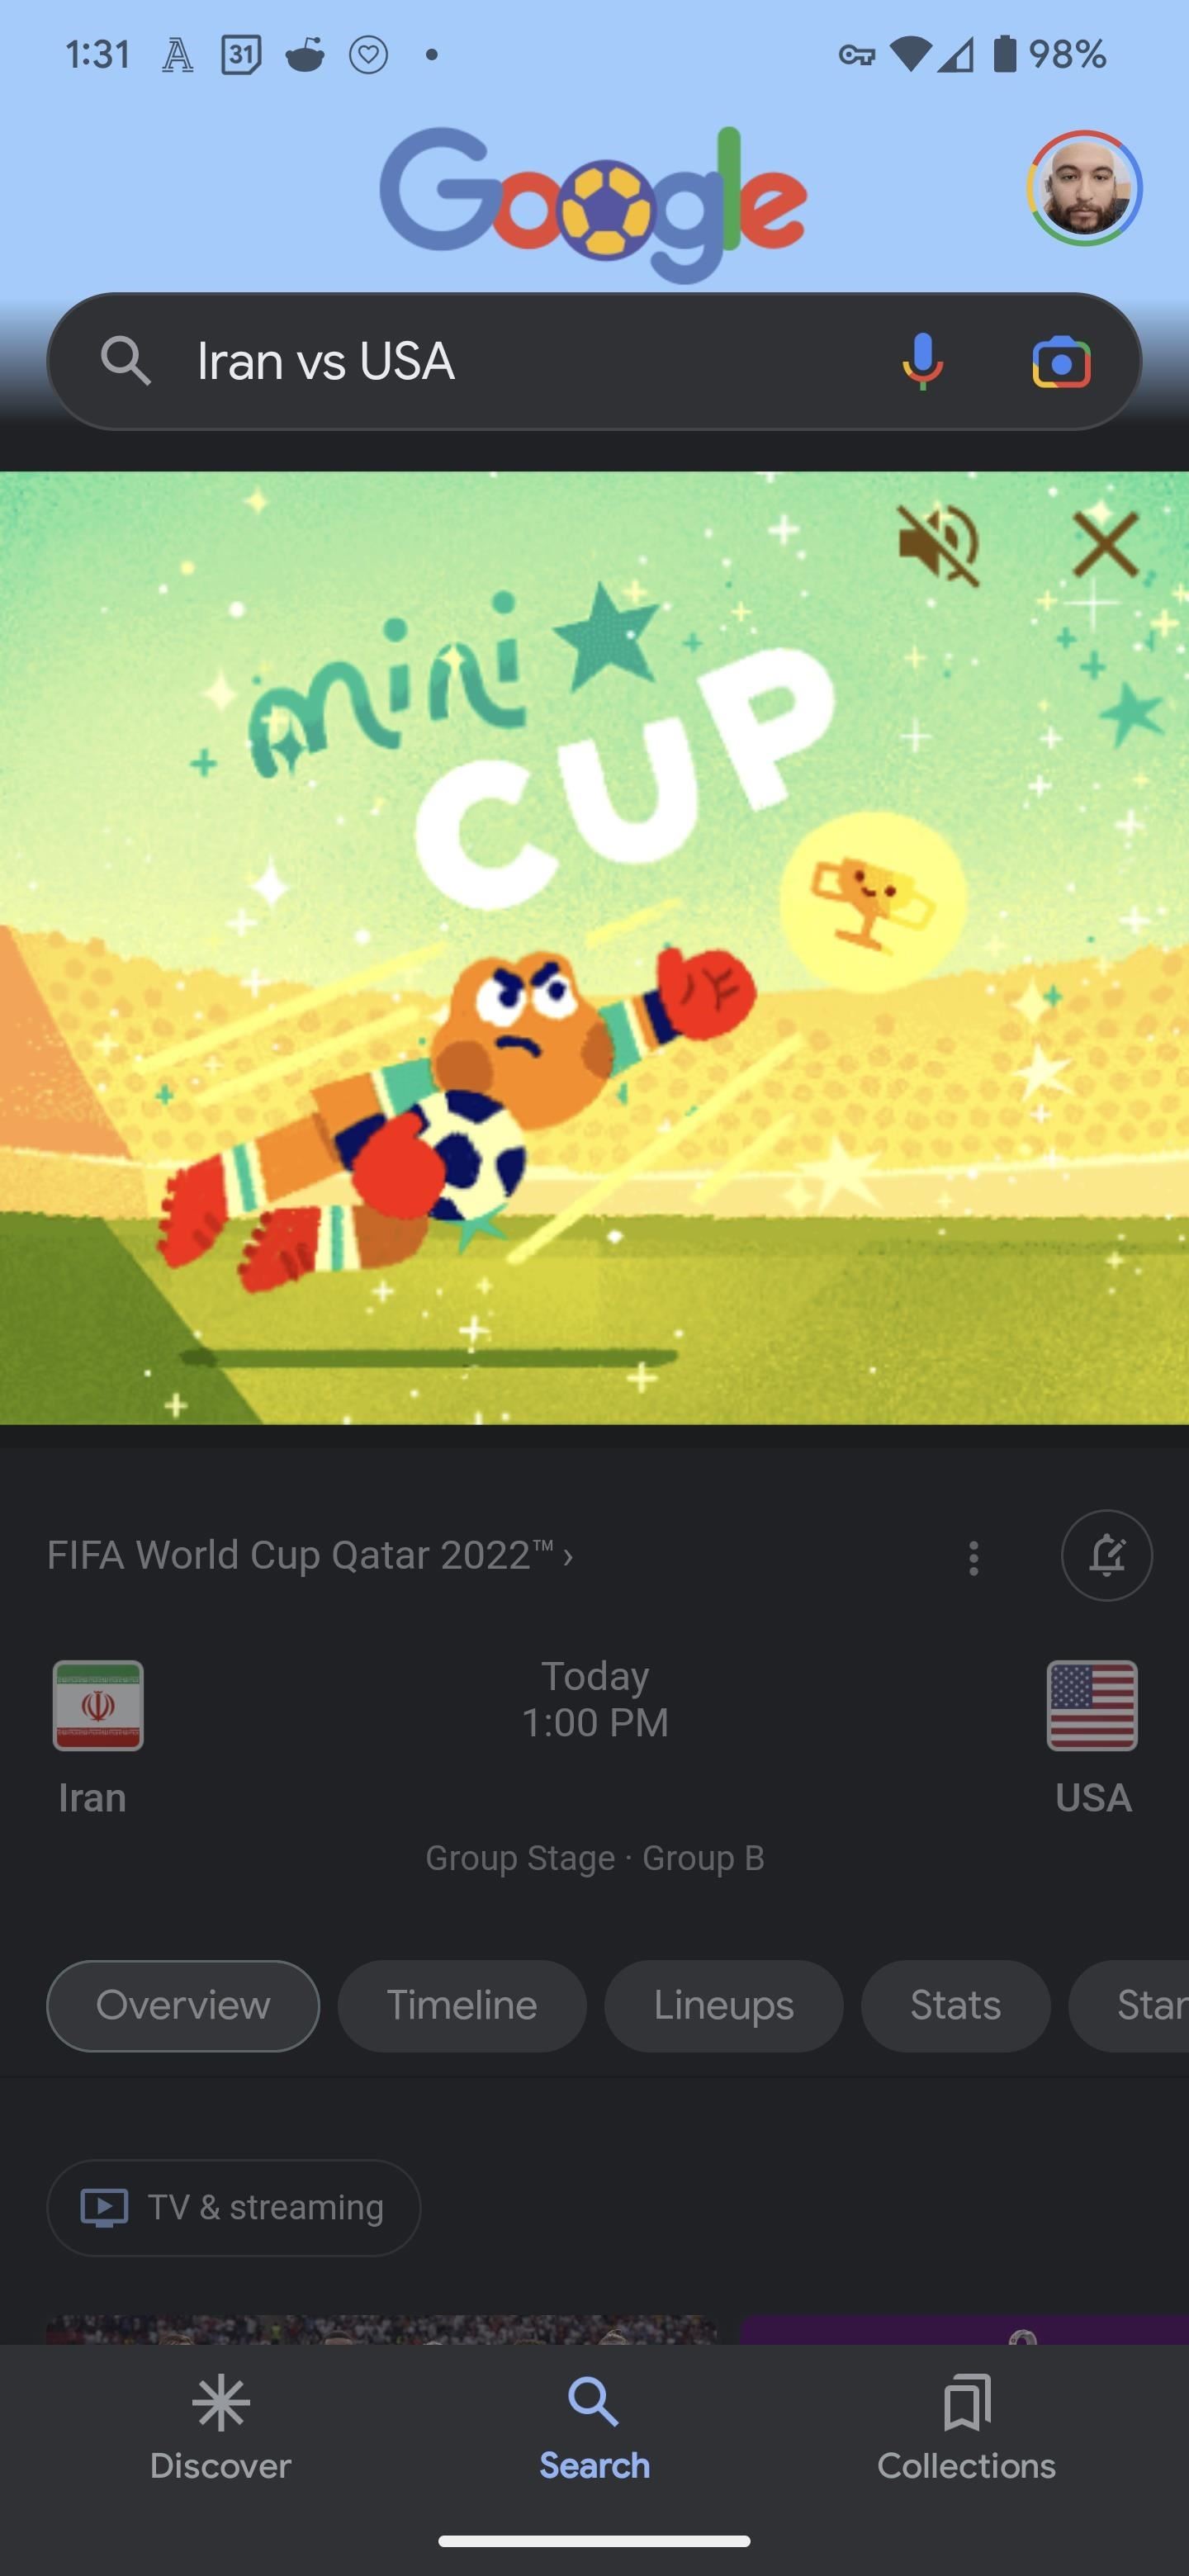 Test Your Goal-Scoring Skills in Google's World Cup Mini Game Easter Egg